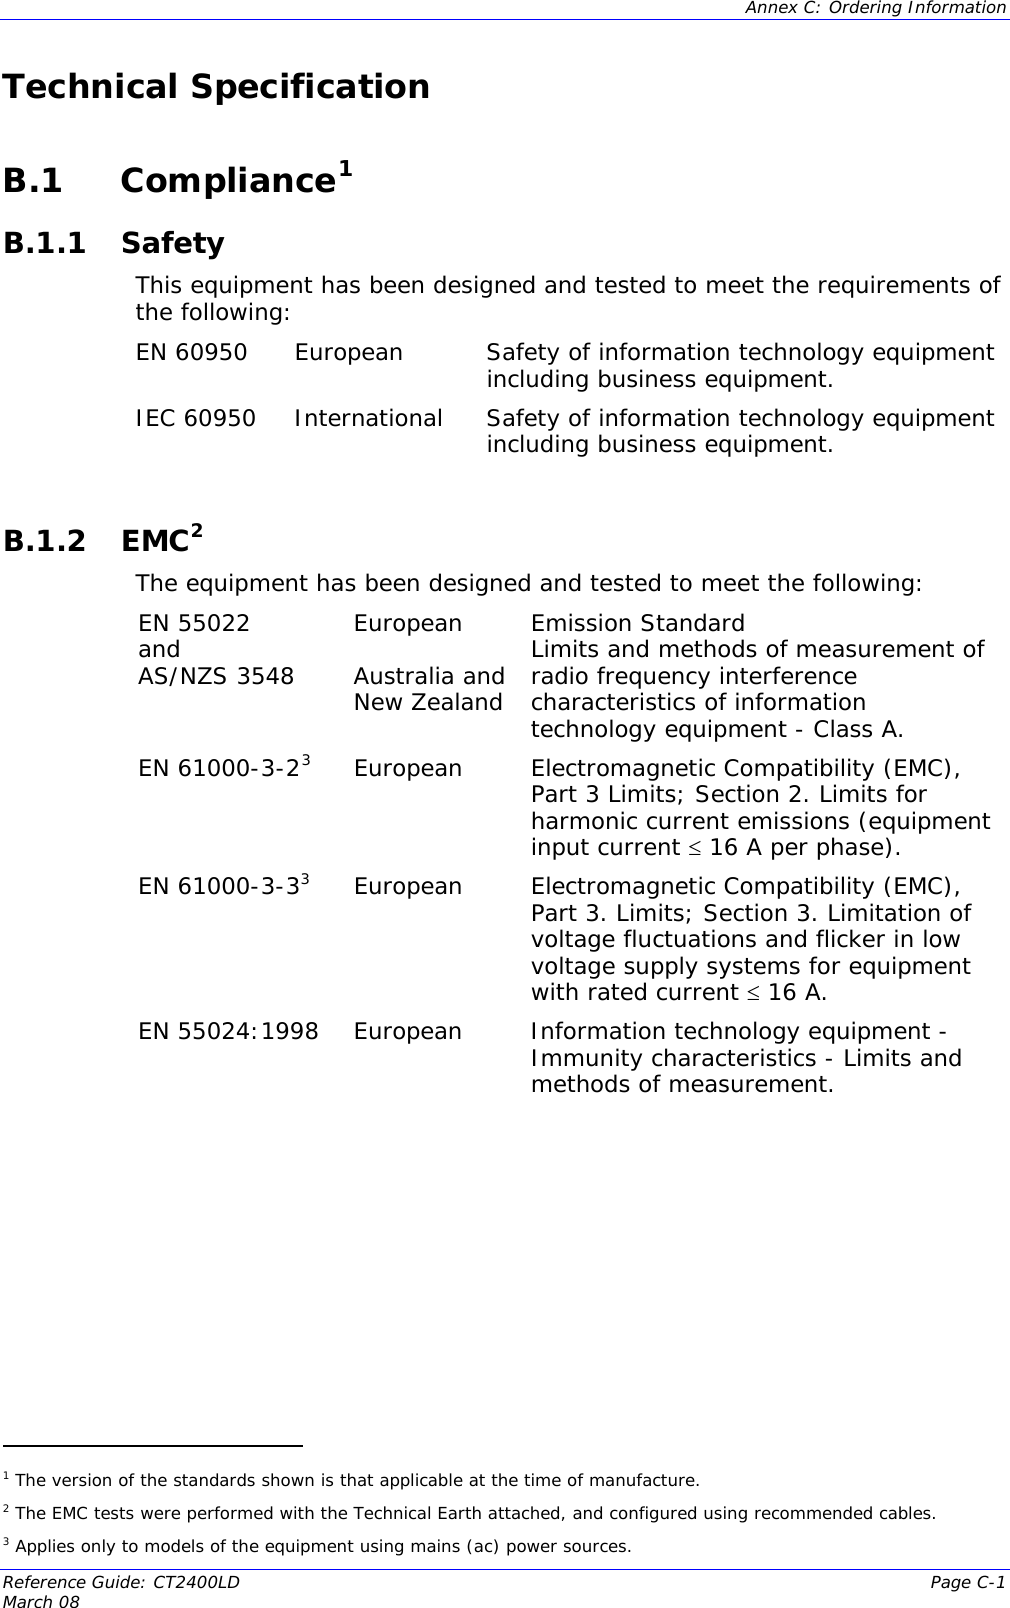  Annex C: Ordering Information  Reference Guide: CT2400LD  Page C-1 March 08                                           Technical Specification  B.1 Compliance1  B.1.1 Safety This equipment has been designed and tested to meet the requirements of the following:  EN 60950  European  Safety of information technology equipment including business equipment. IEC 60950  International  Safety of information technology equipment including business equipment.  B.1.2 EMC2 The equipment has been designed and tested to meet the following:  EN 55022  and AS/NZS 3548   European  Australia and New Zealand Emission Standard Limits and methods of measurement of radio frequency interference characteristics of information technology equipment - Class A. EN 61000-3-23European  Electromagnetic Compatibility (EMC), Part 3 Limits; Section 2. Limits for harmonic current emissions (equipment input current ≤ 16 A per phase). EN 61000-3-33European  Electromagnetic Compatibility (EMC), Part 3. Limits; Section 3. Limitation of voltage fluctuations and flicker in low voltage supply systems for equipment with rated current ≤ 16 A. EN 55024:1998   European  Information technology equipment - Immunity characteristics - Limits and methods of measurement.     1 The version of the standards shown is that applicable at the time of manufacture. 2 The EMC tests were performed with the Technical Earth attached, and configured using recommended cables. 3 Applies only to models of the equipment using mains (ac) power sources. 